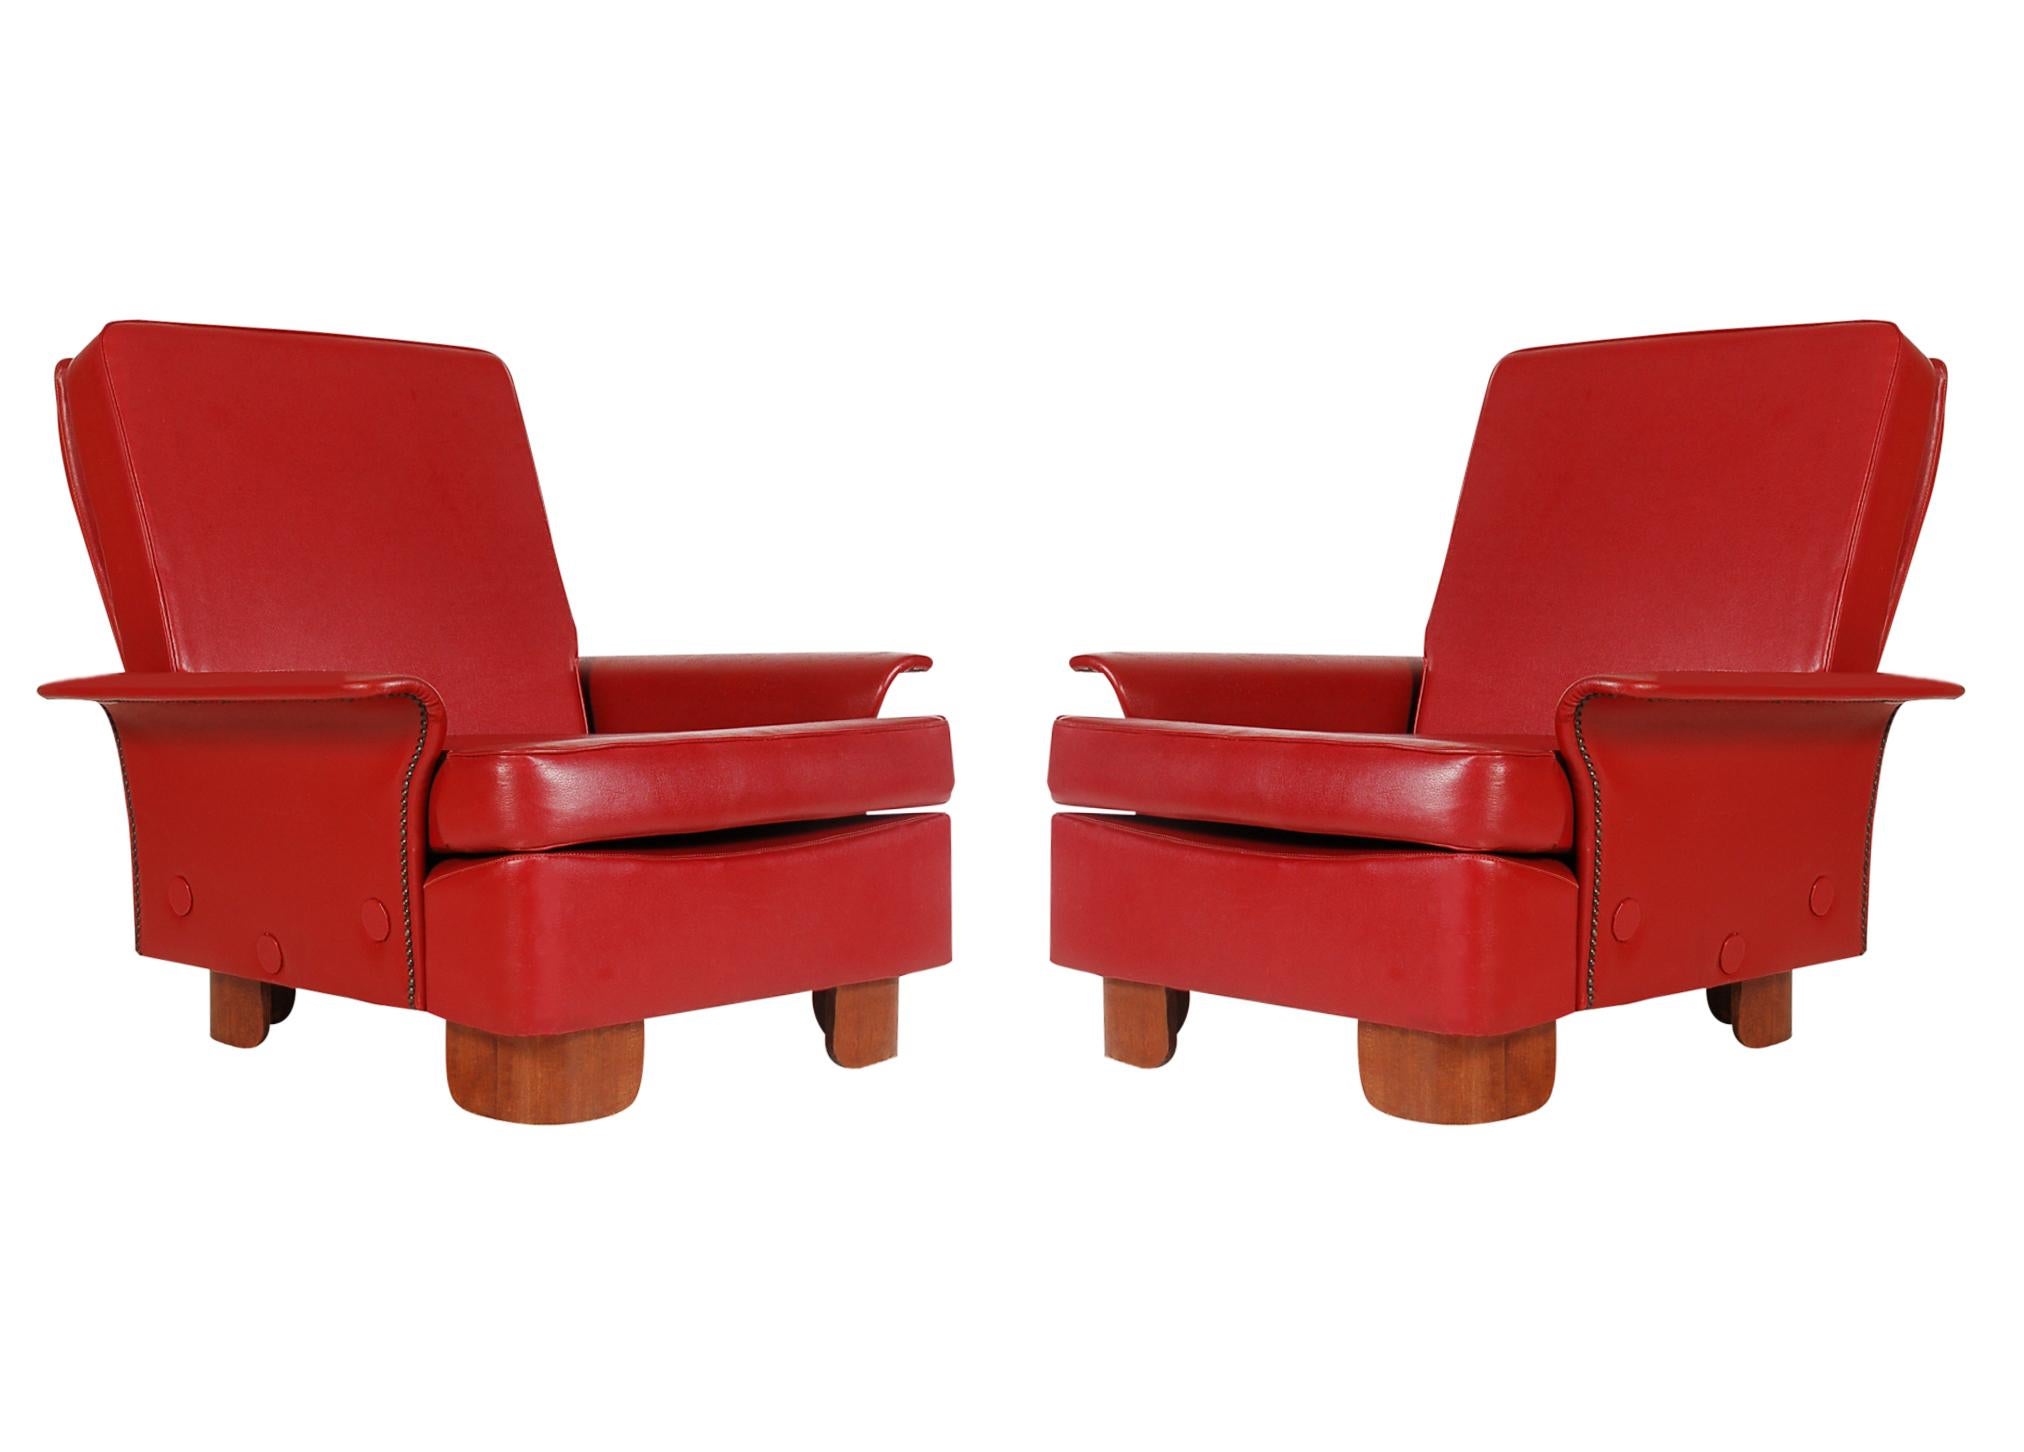 Pair of Midcentury Italian Modern Art Deco Lounge or Club Chairs in Red For Sale 4